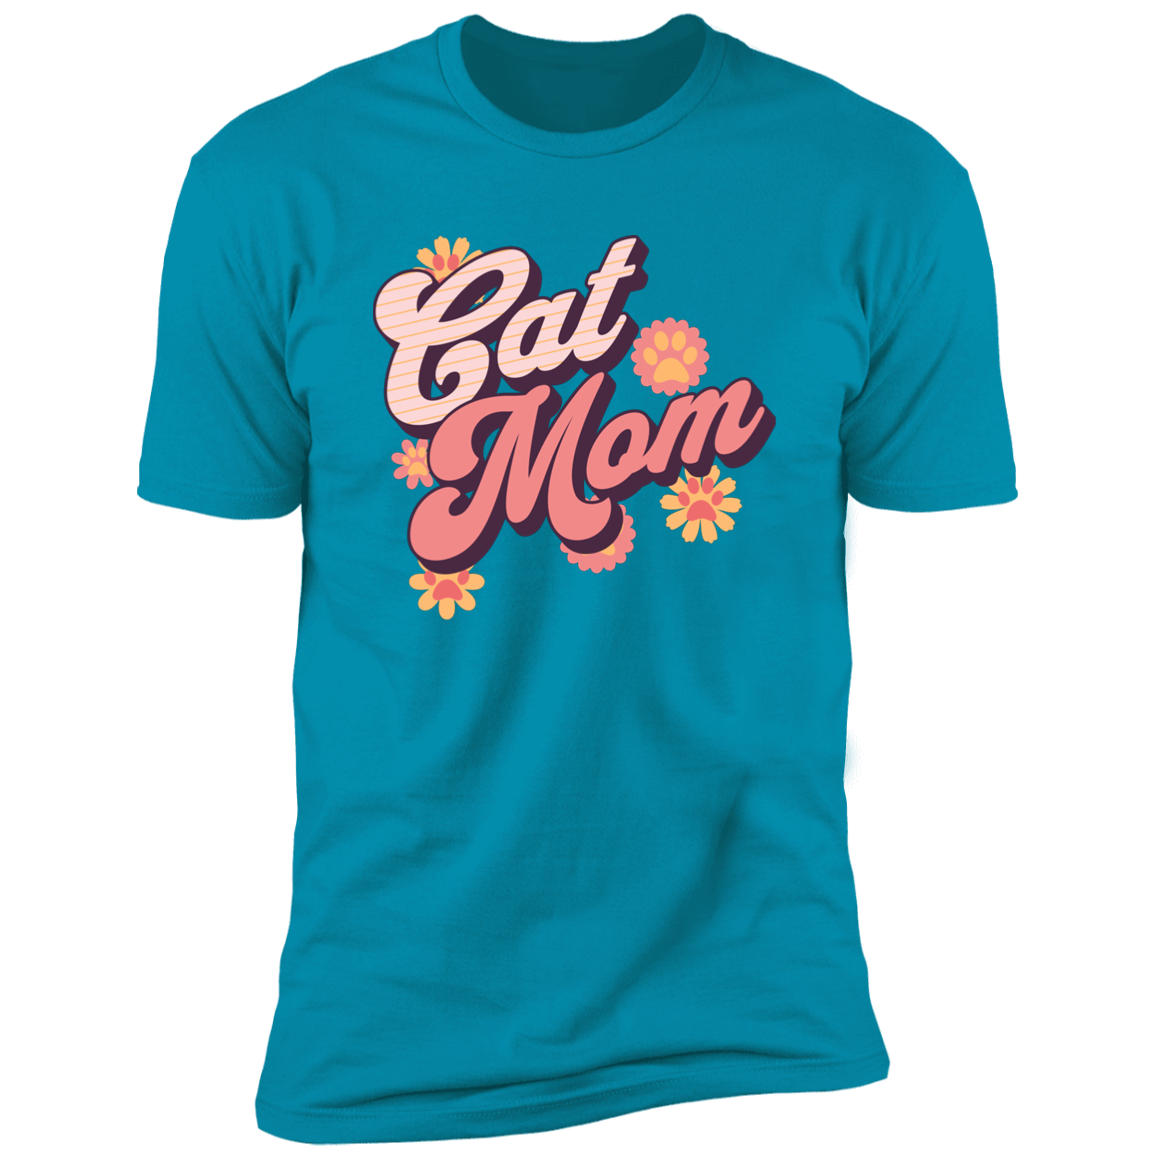 Cat Mom Retro T-shirt, Cat Mom Shirt for humans, in turquoise